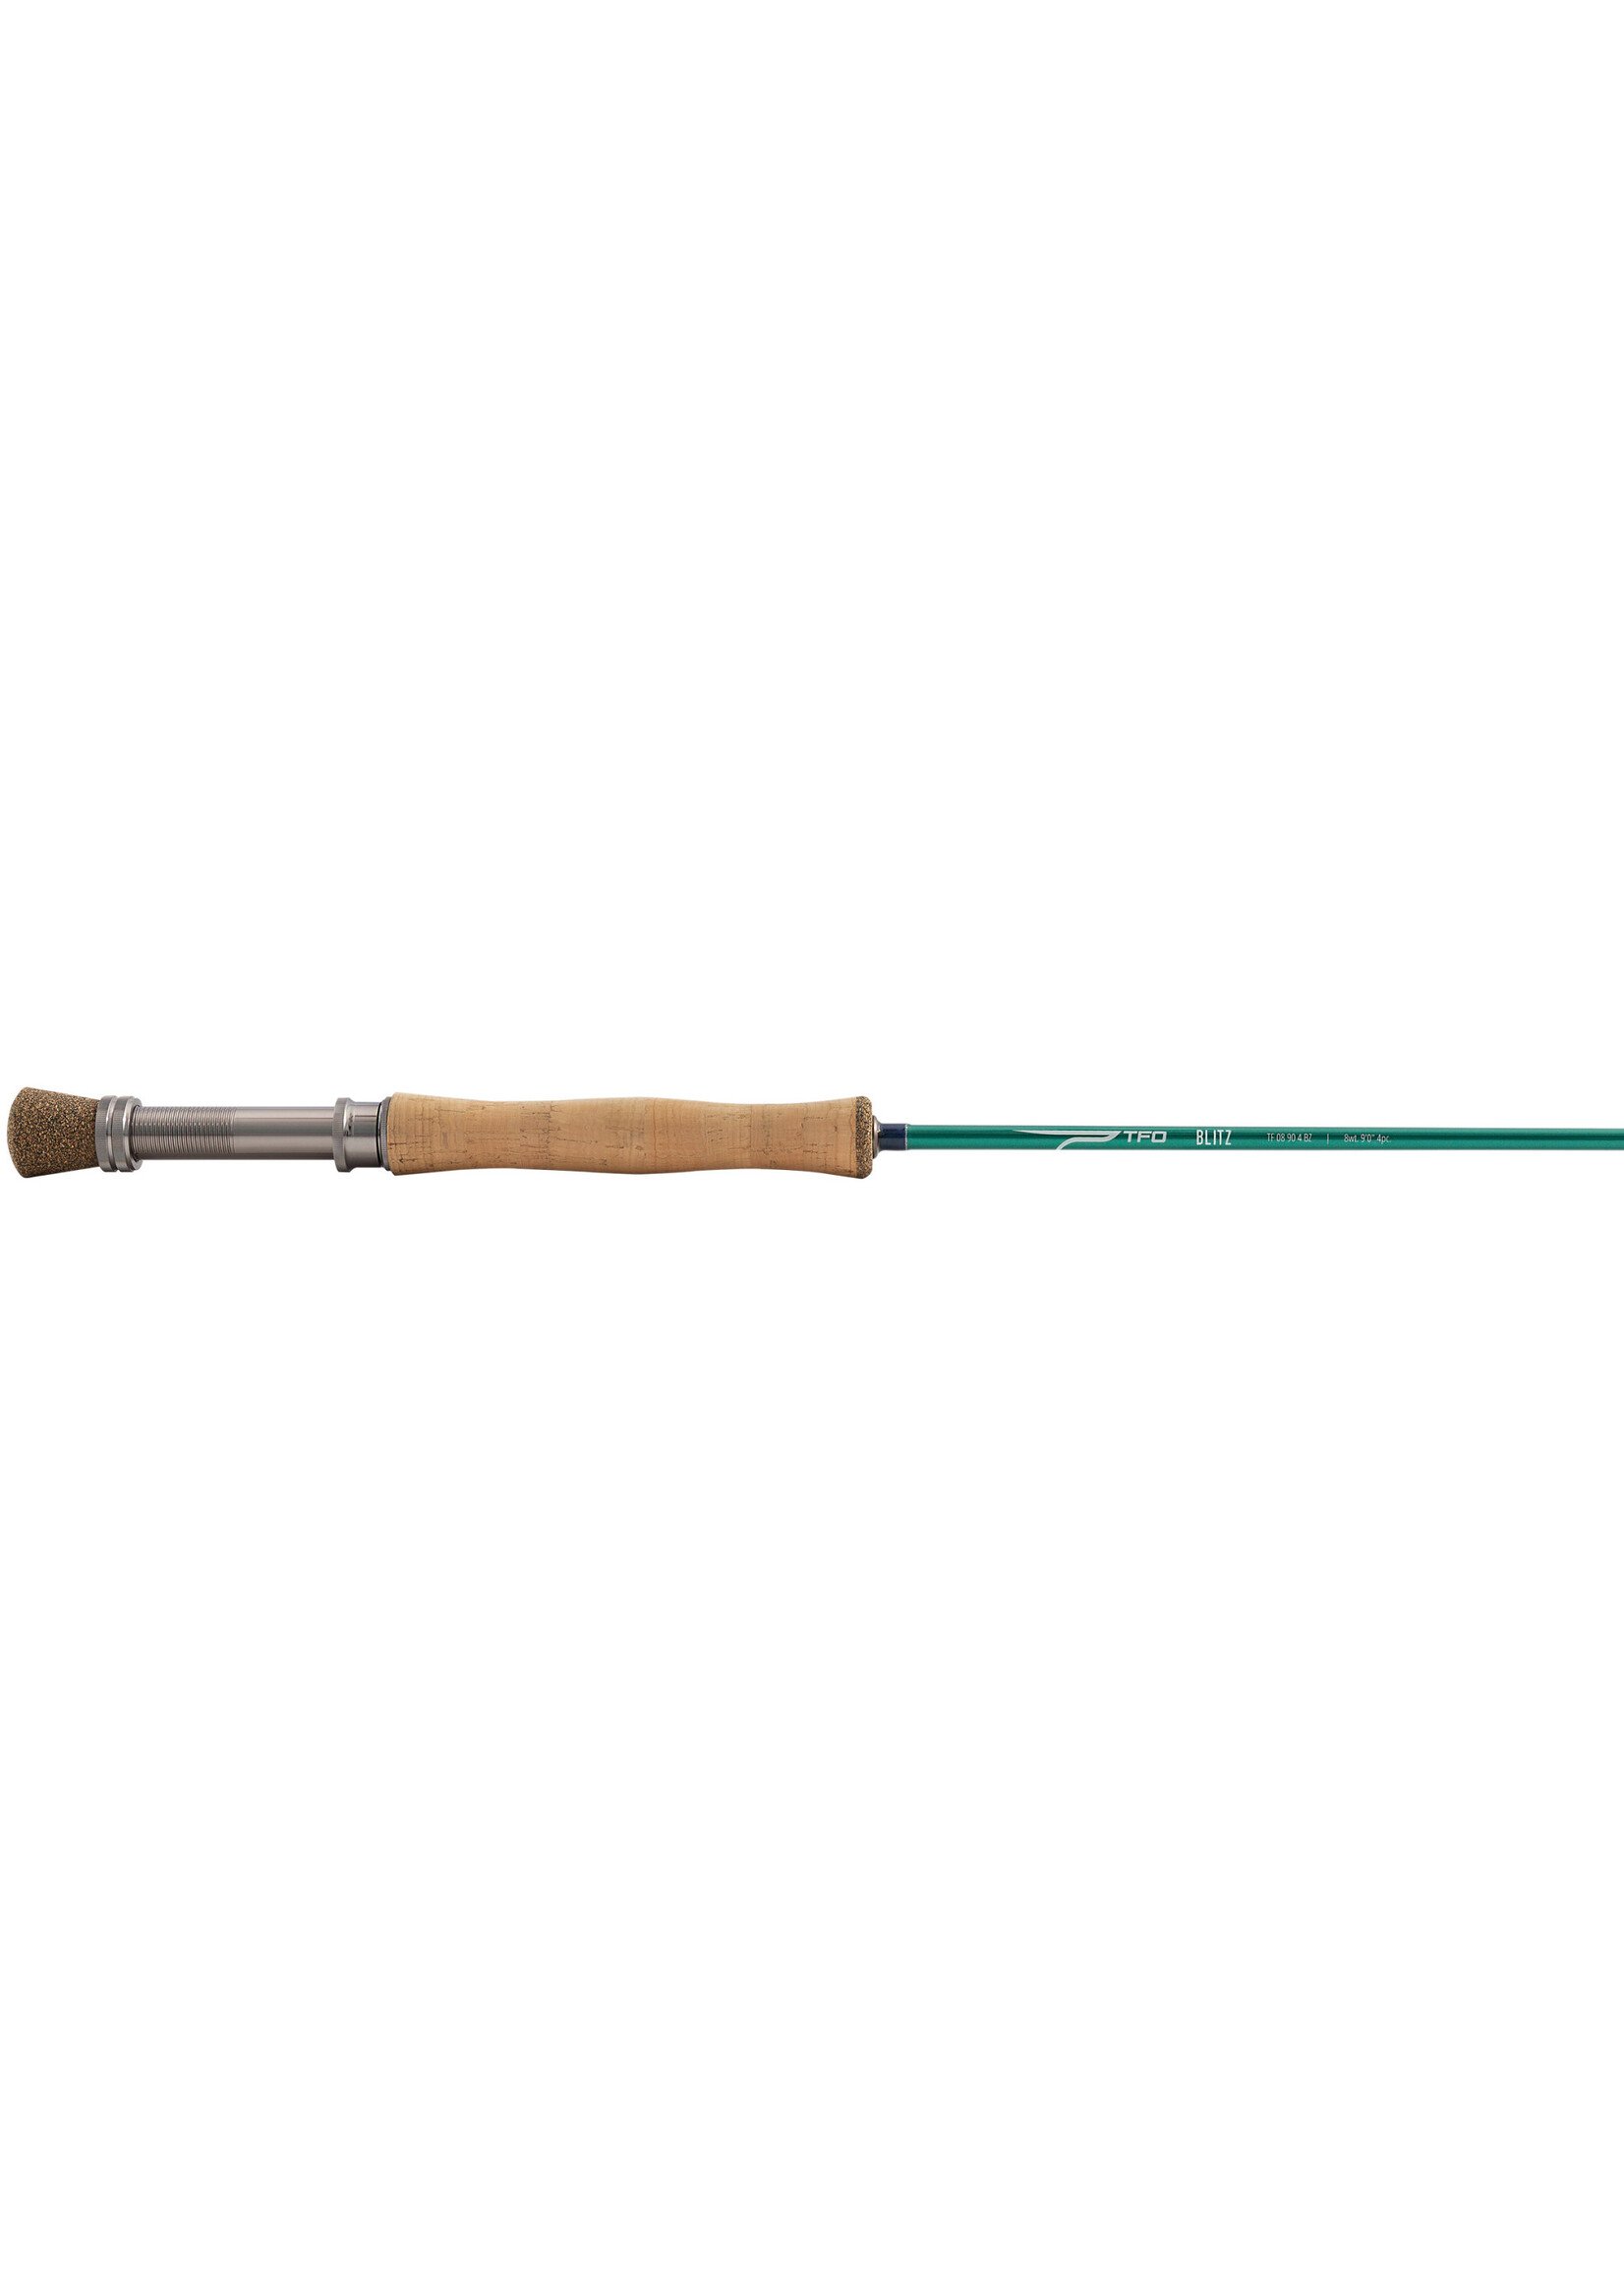 Temple Fork Outfitters TFO Blitz Fly Rod